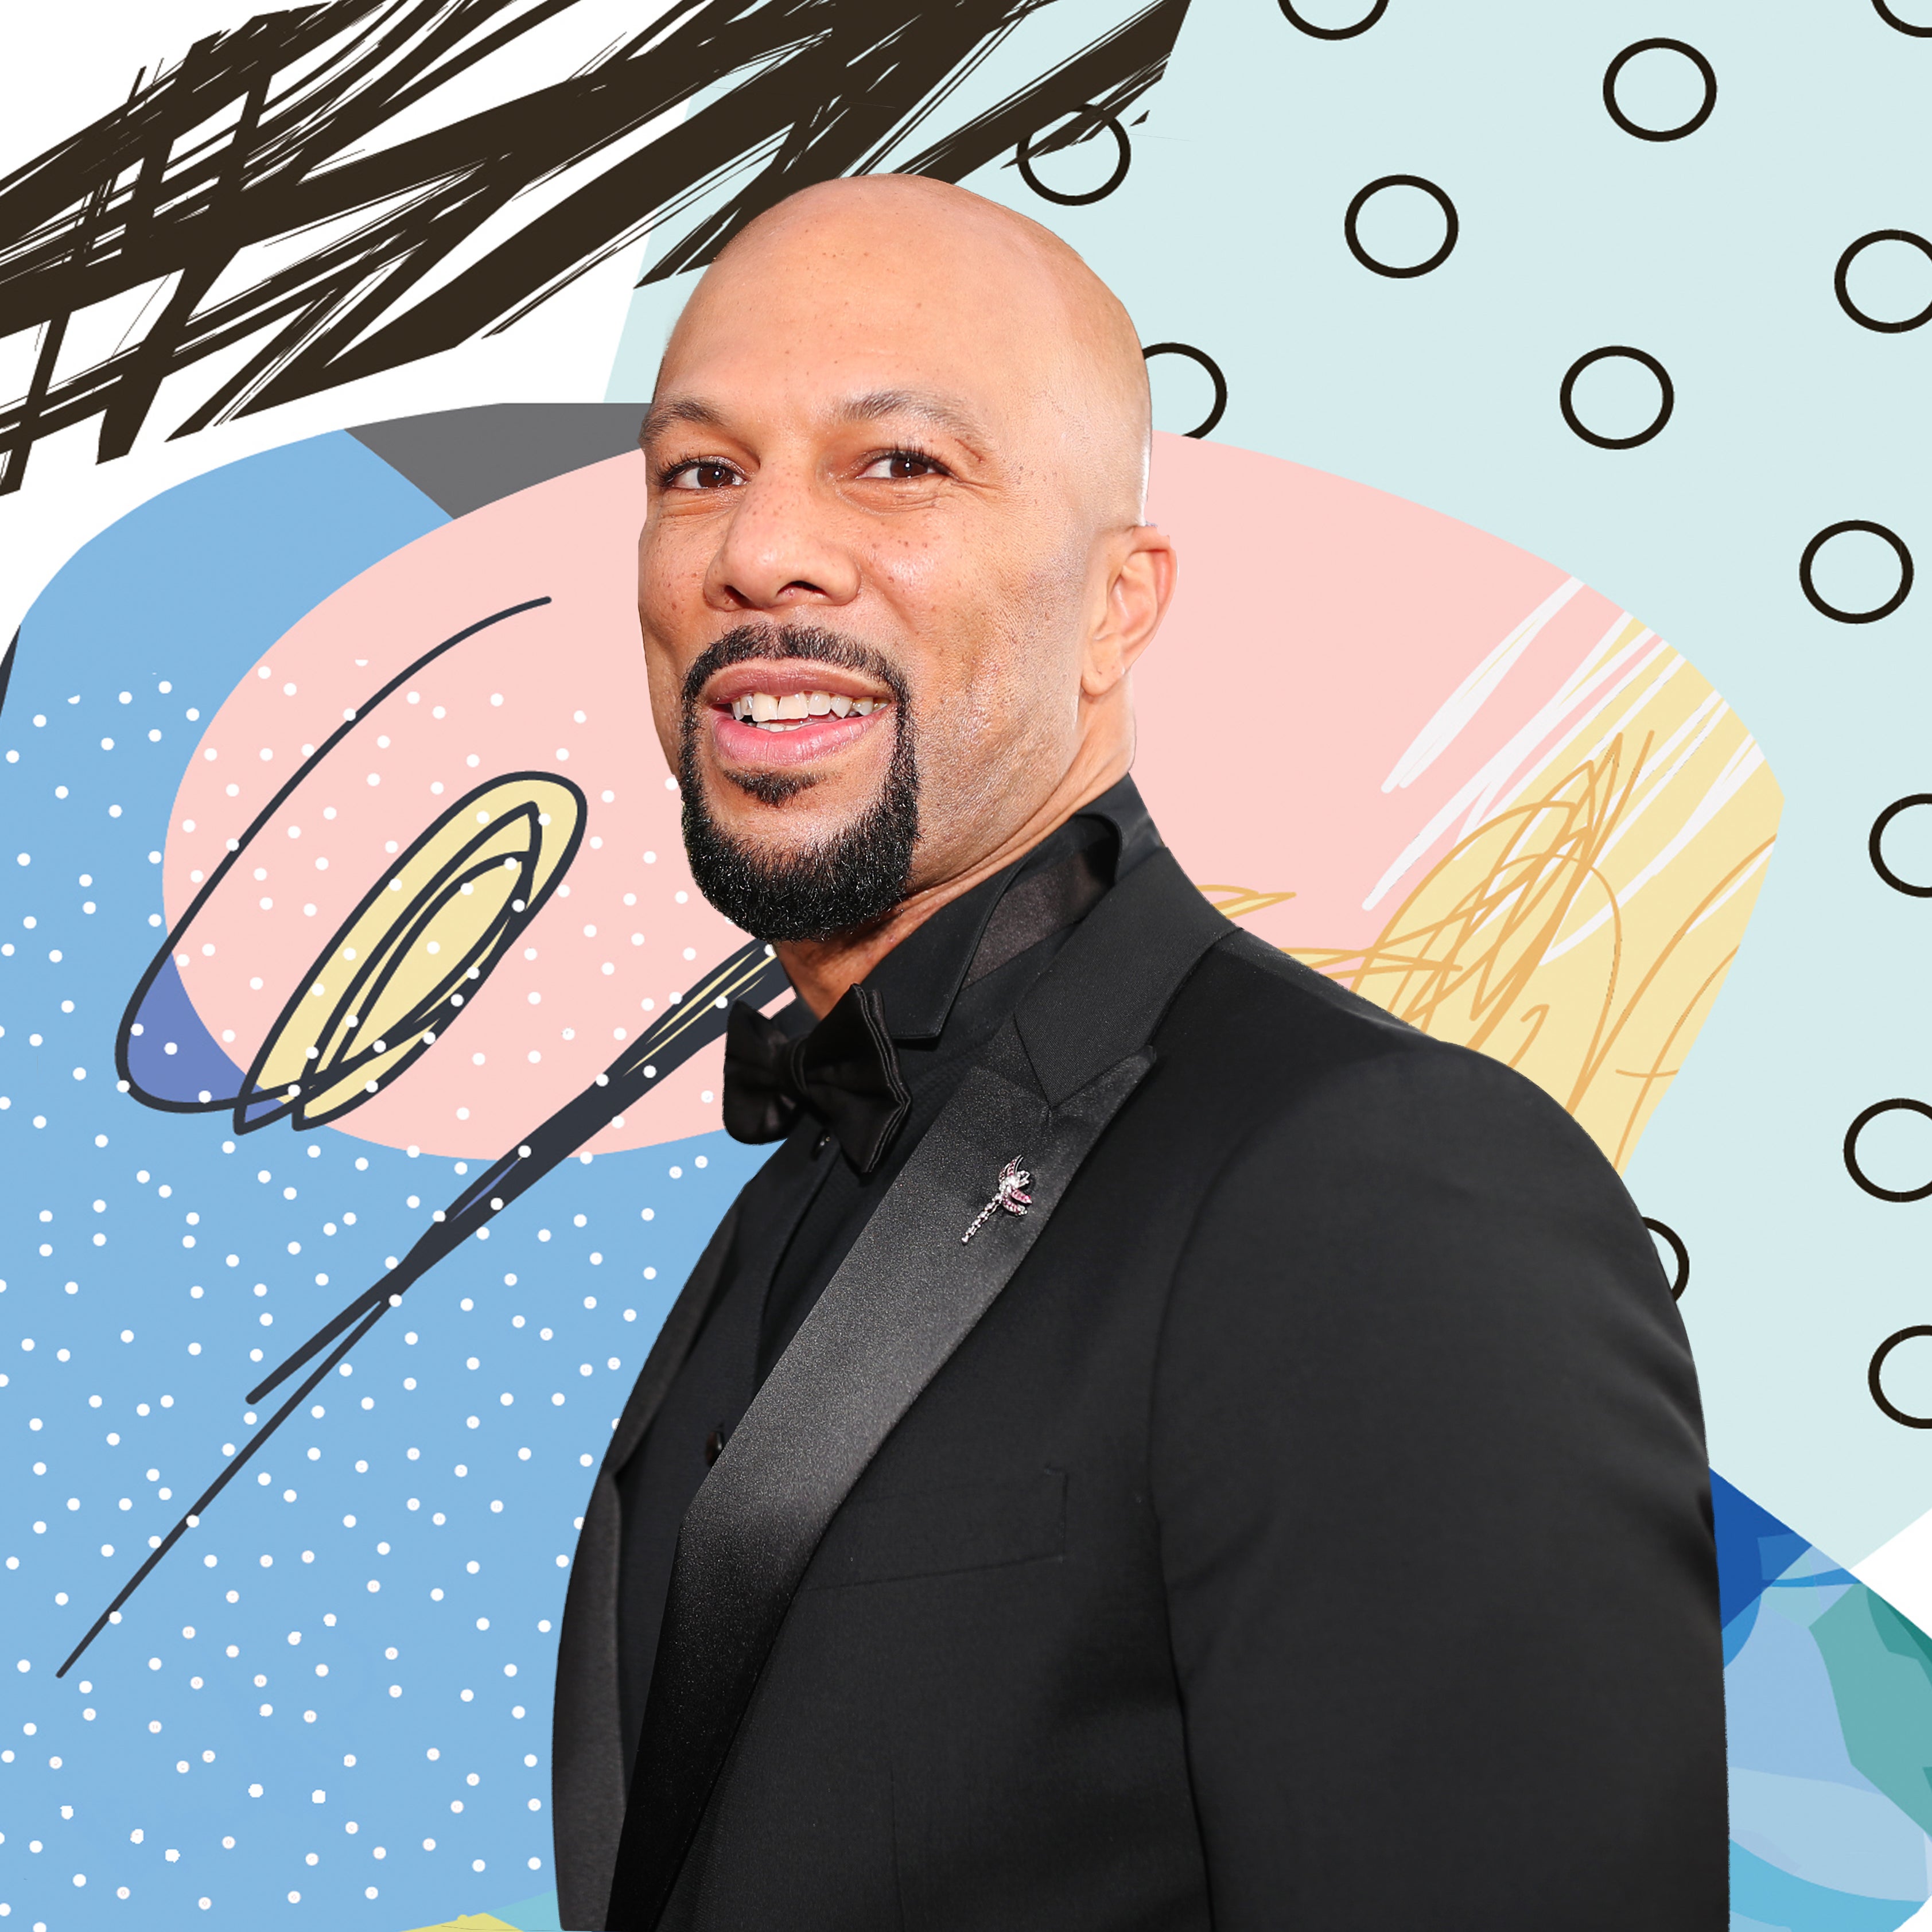 Watch #InMyFeed: Common Opens Up About Angela Rye, Whoopi Goldberg Talks Weed, And More